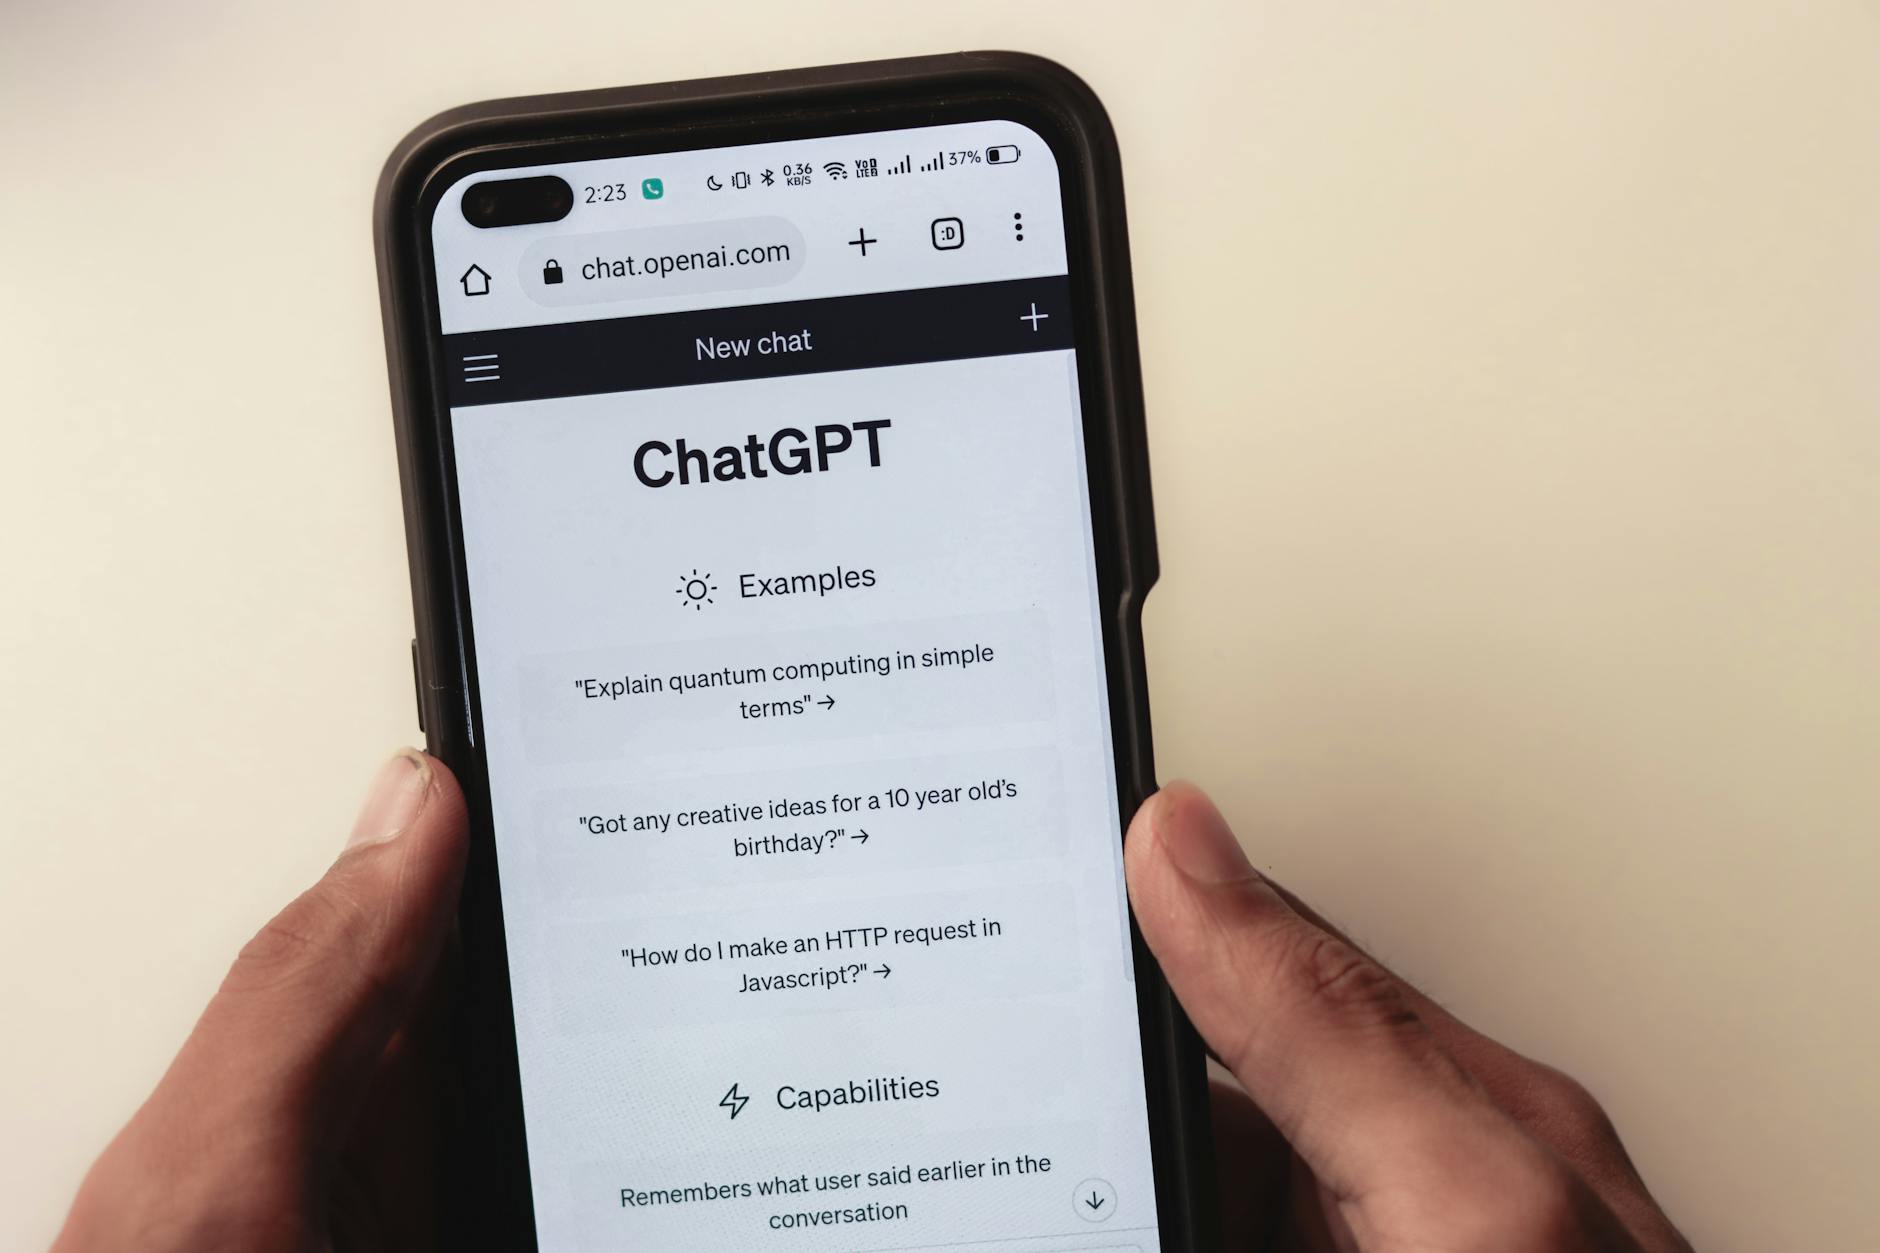 can you use chatgpt without login?